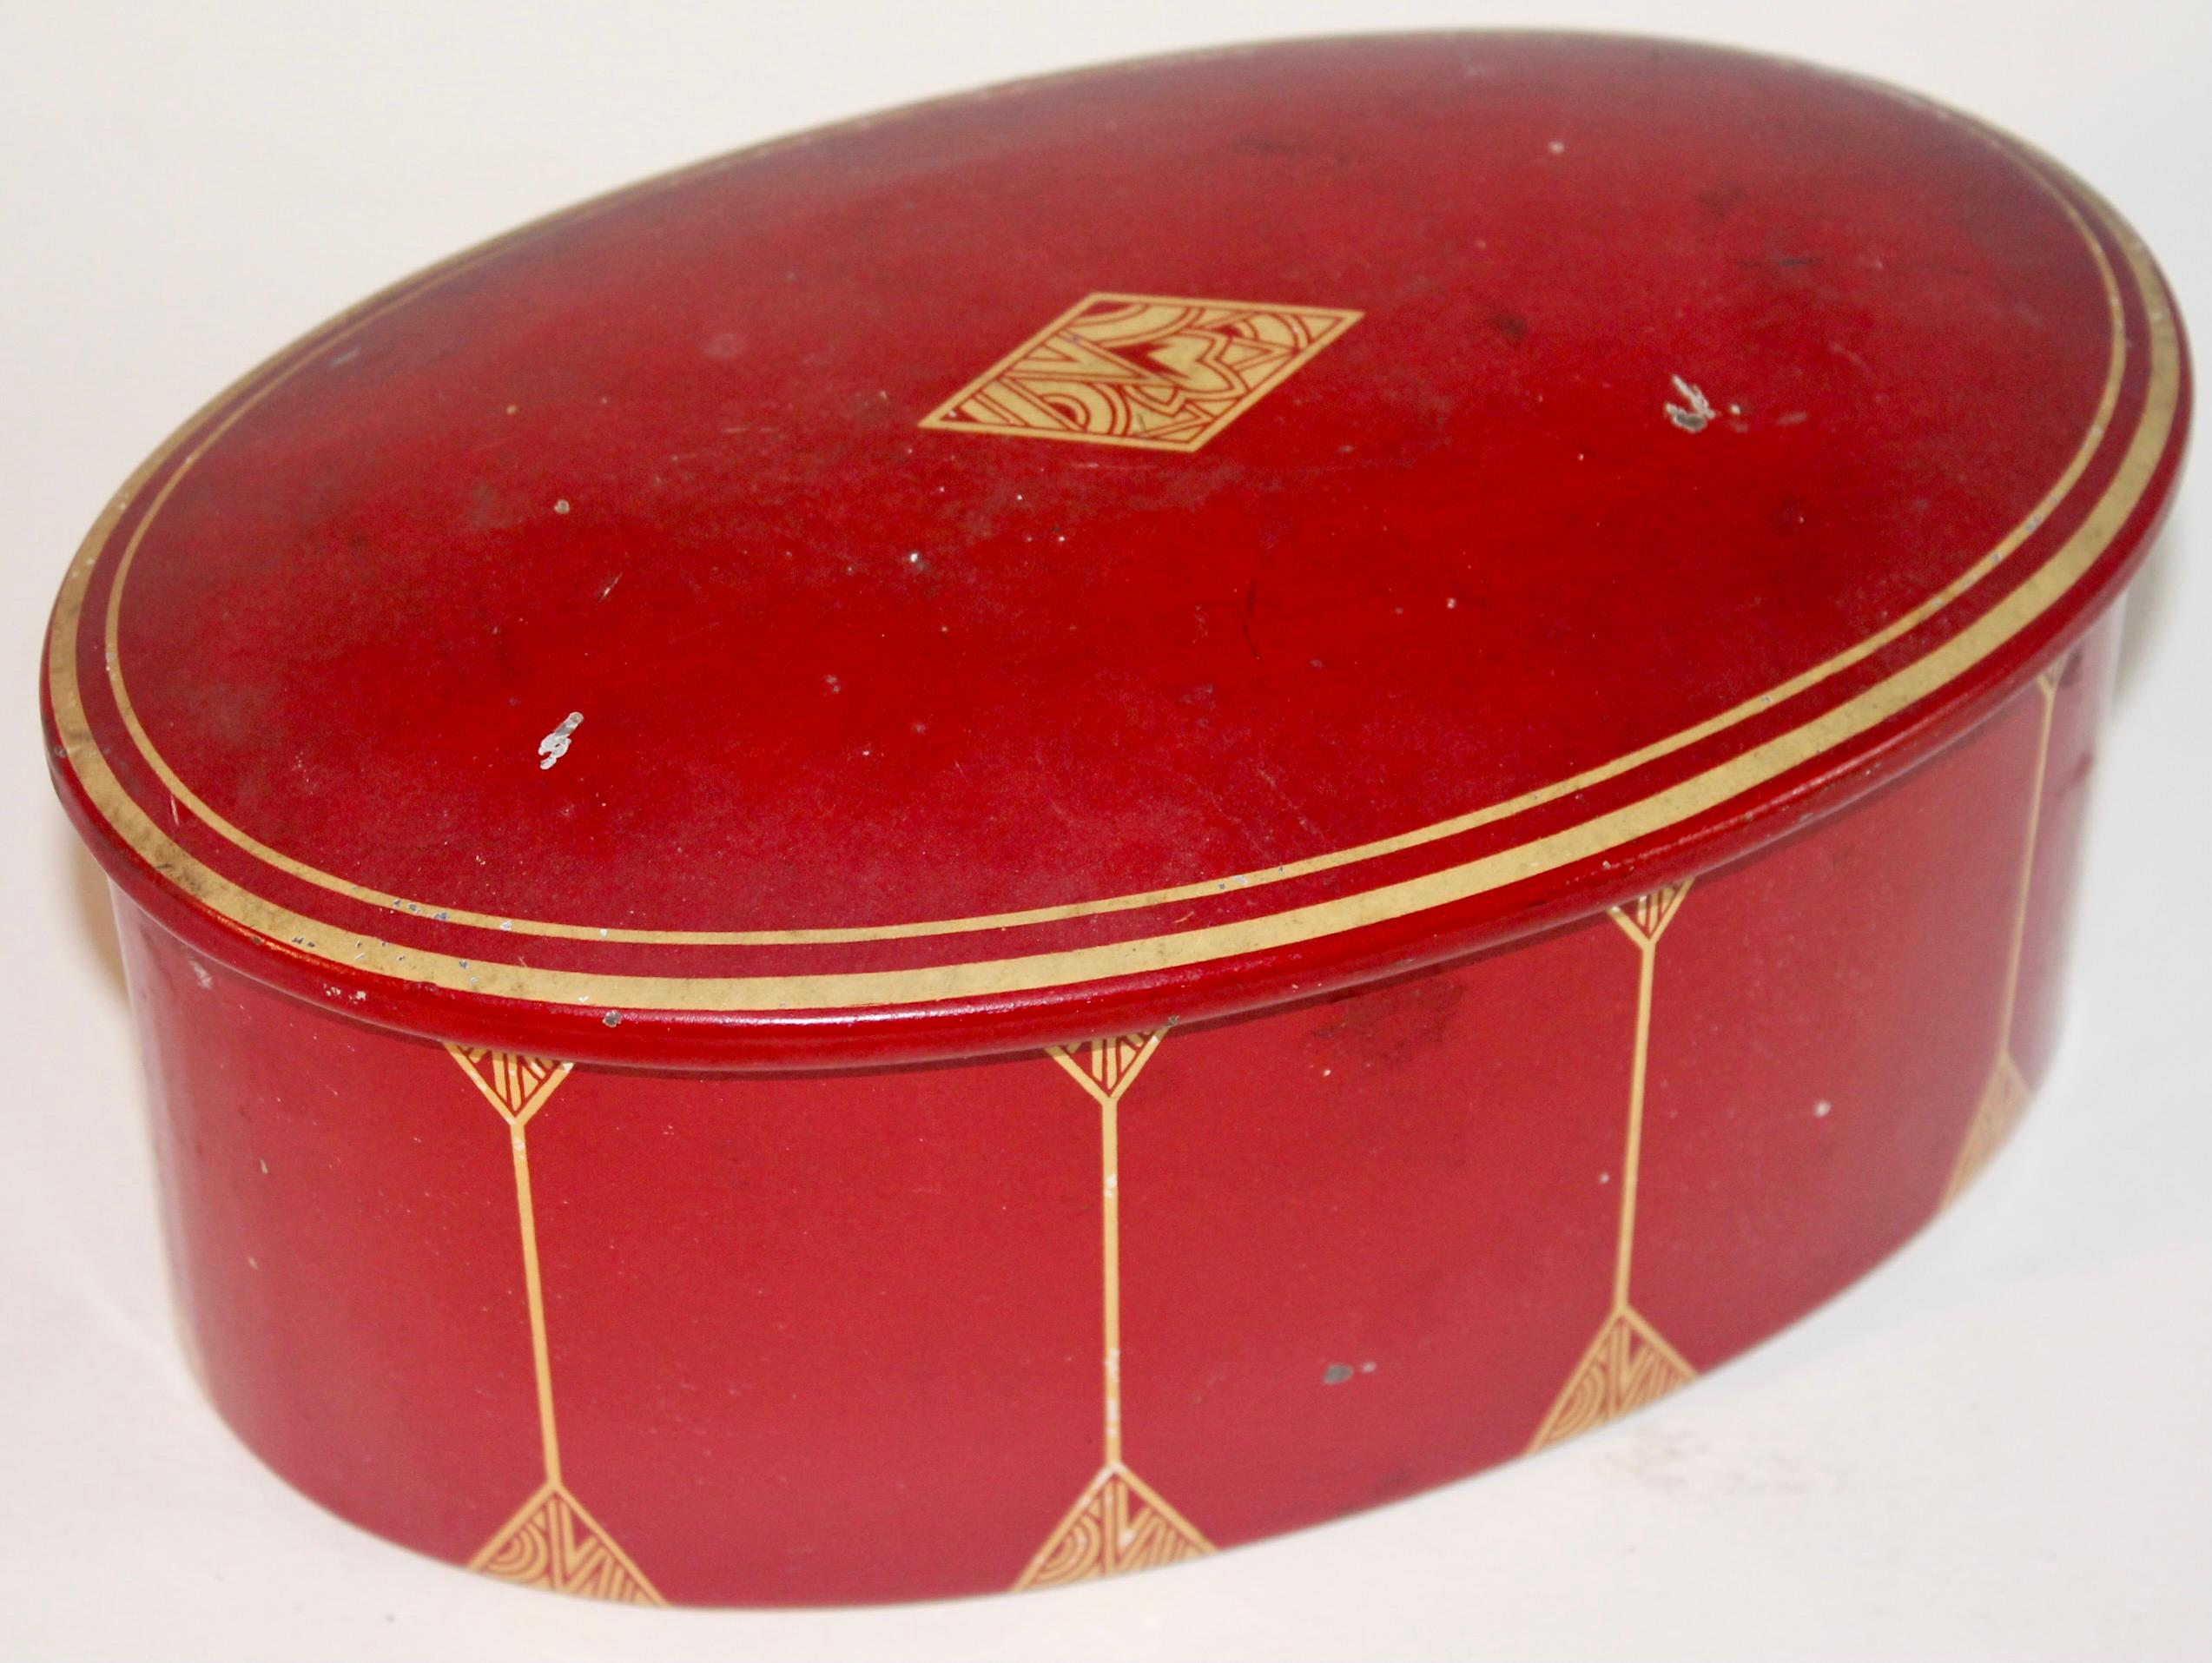 Three beautifully decorated Austrian/German biscuit or candy tins. The red oval: 8x3.5x5